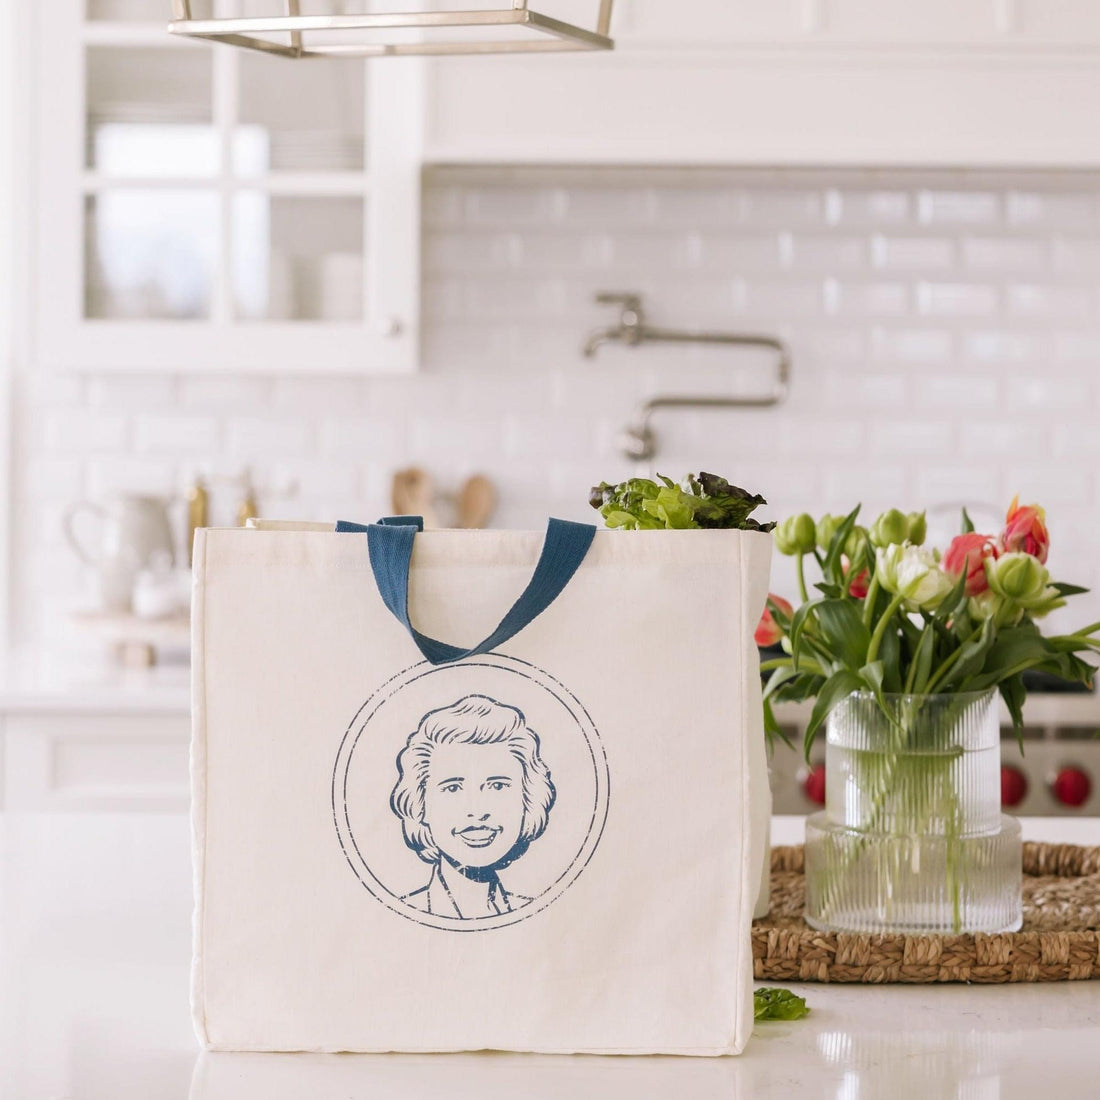 Nellie's cream coloured tote with logo face on counter